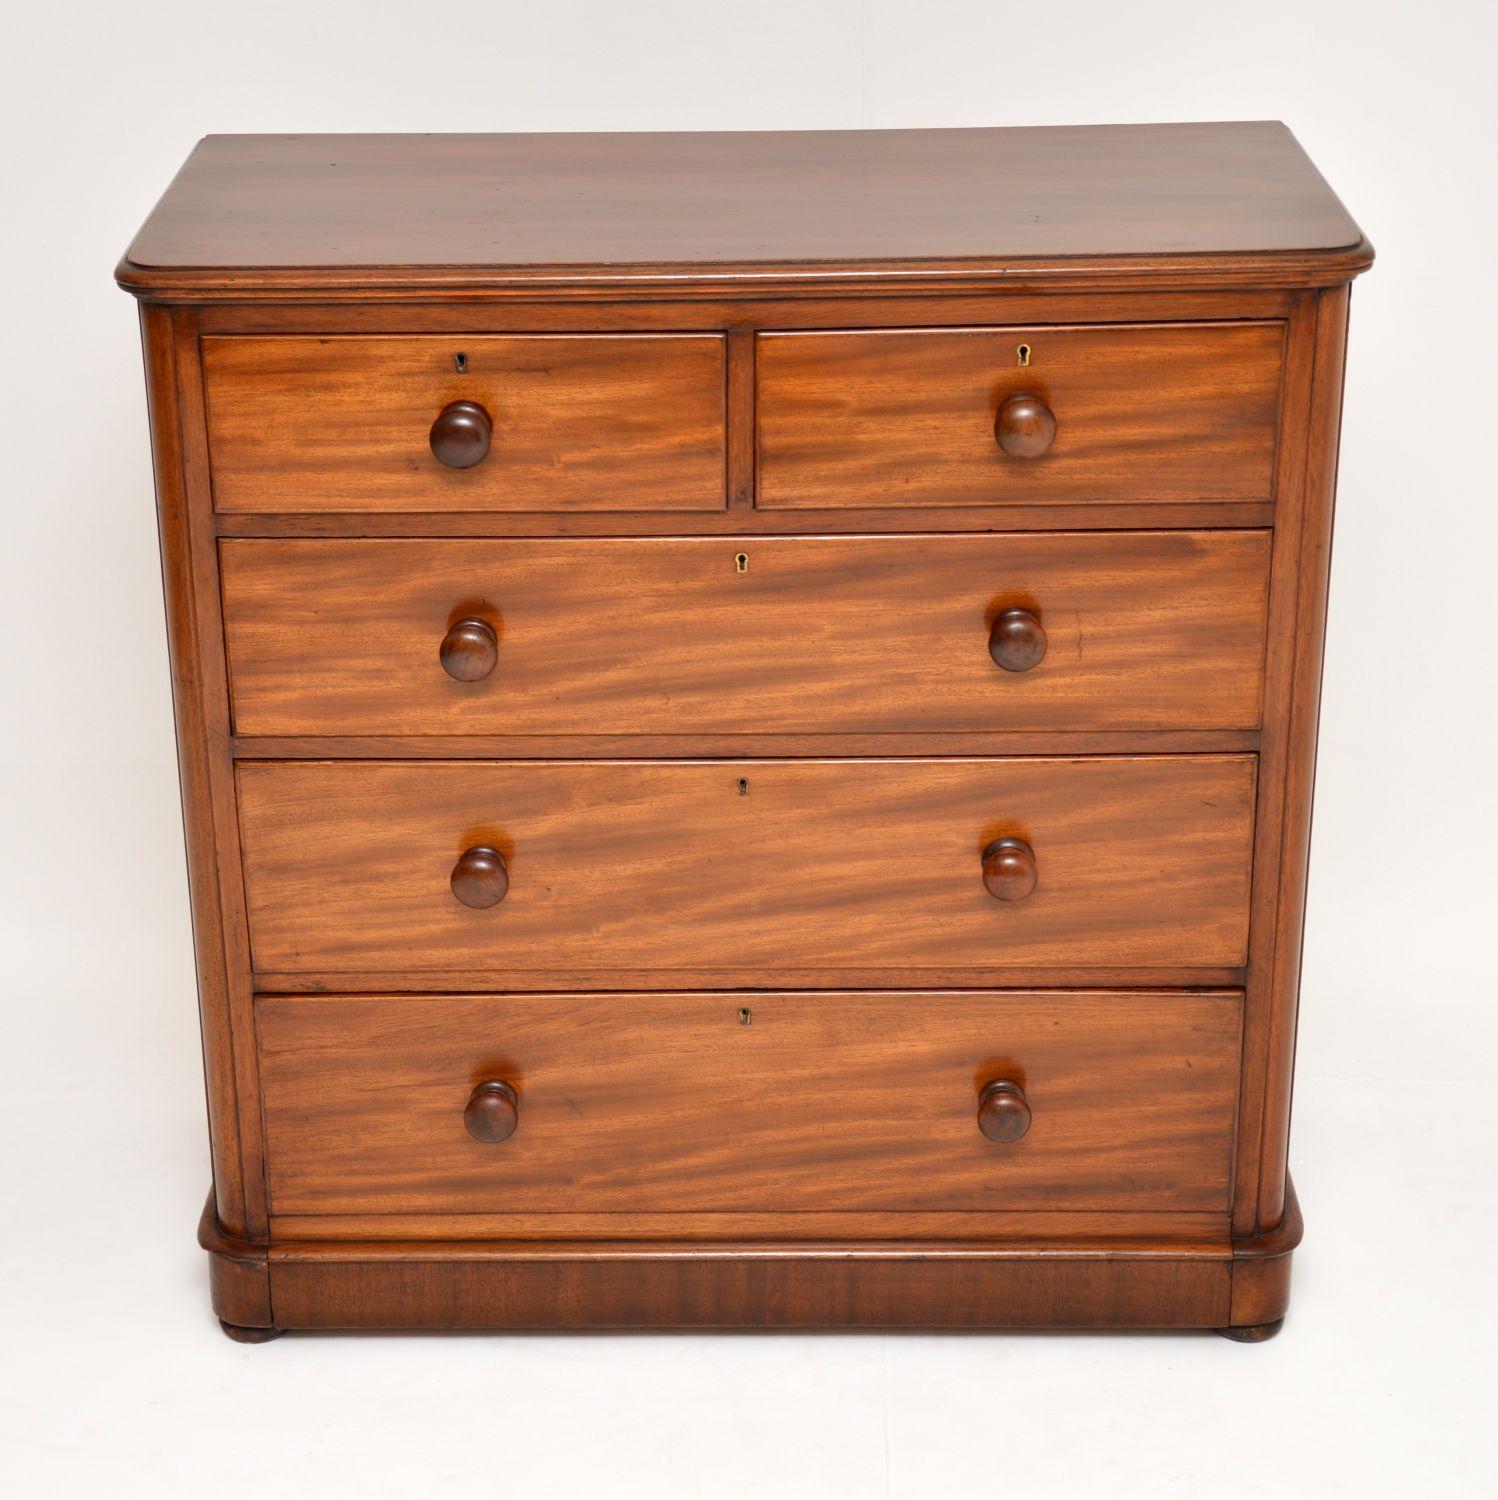 Fine quality Victorian mahogany chest of drawers in excellent original condition and dating to circa 1860s-1870s period.

It has a solid mahogany top and sits on a plinth base which incorporates the extra deep bottom drawer. The front corners are